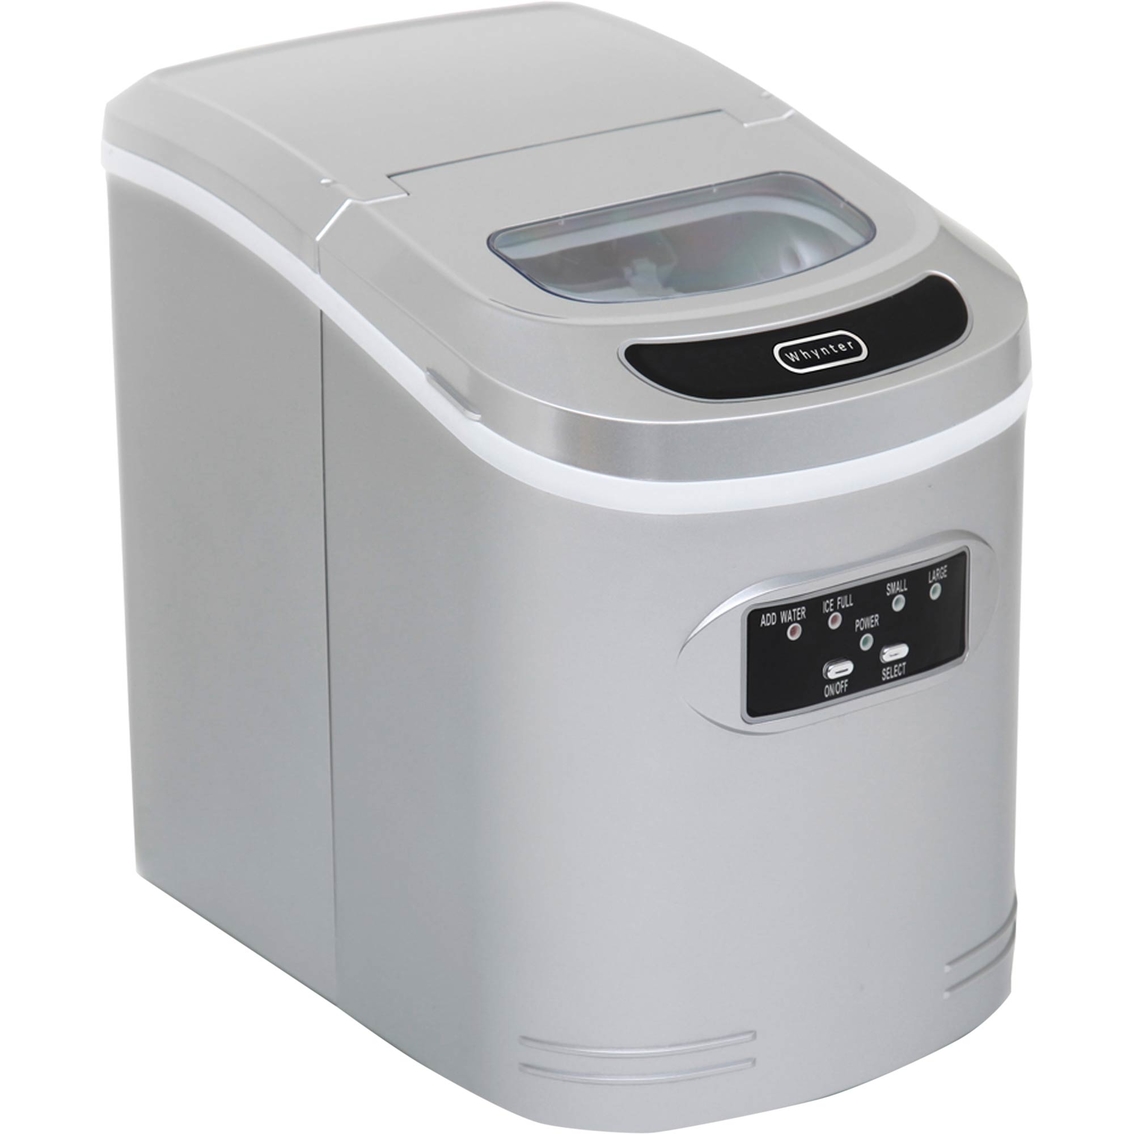 Whynter Compact Portable Ice Maker with 27 lb. Capacity - Image 3 of 4